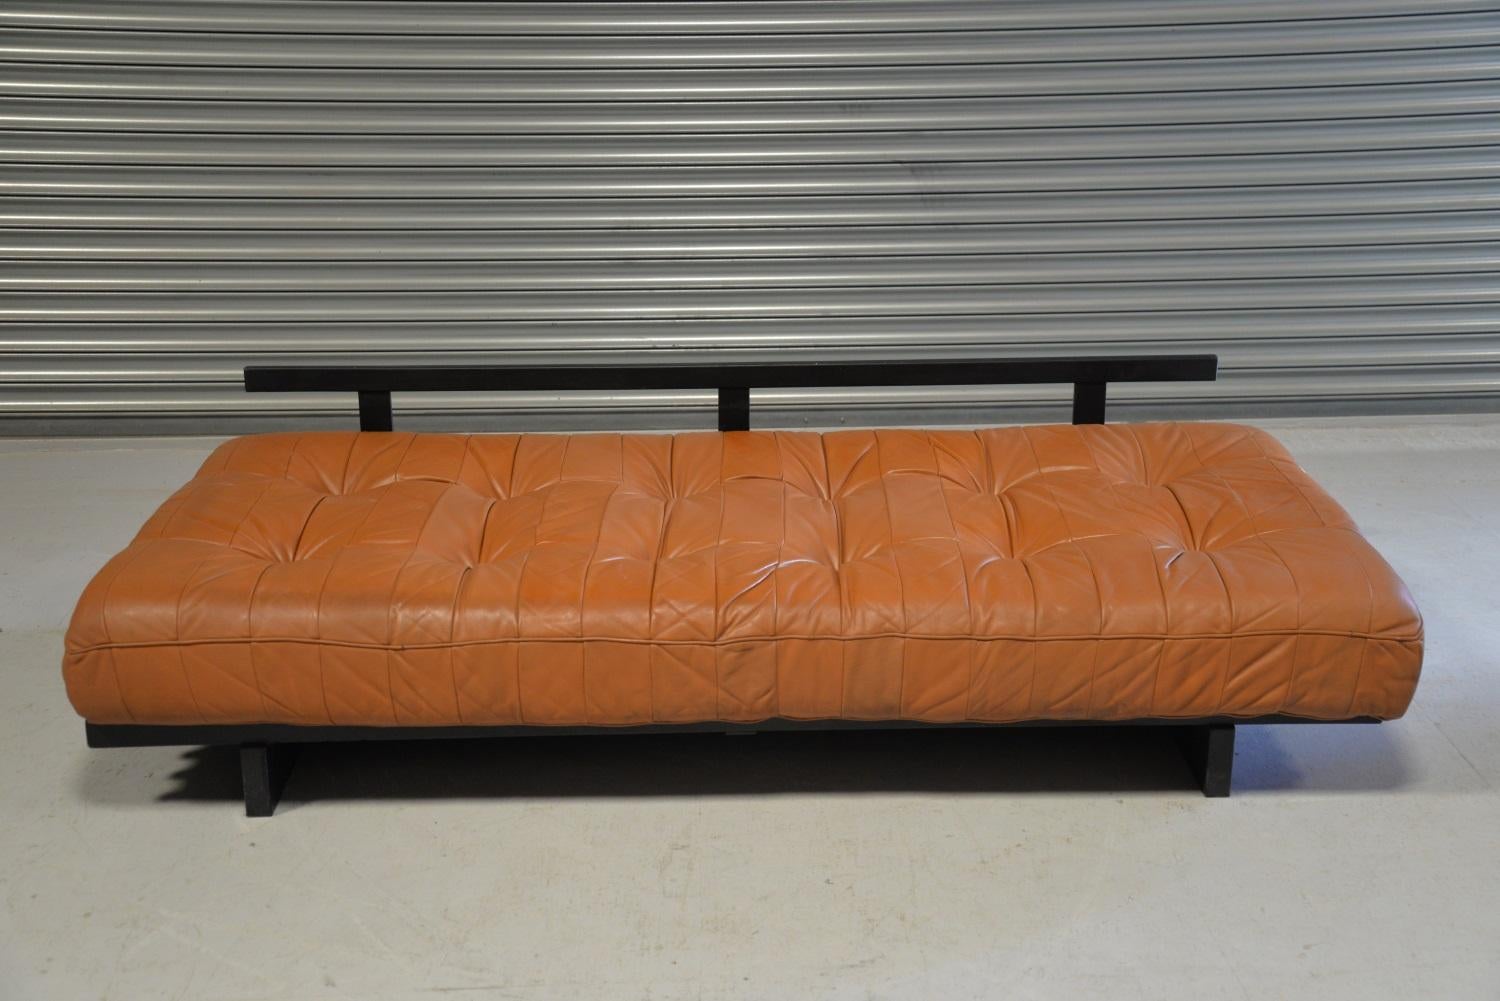 Vintage De Sede DS 80 Patchwork Leather Daybed, Switzerland, 1960s For Sale 5